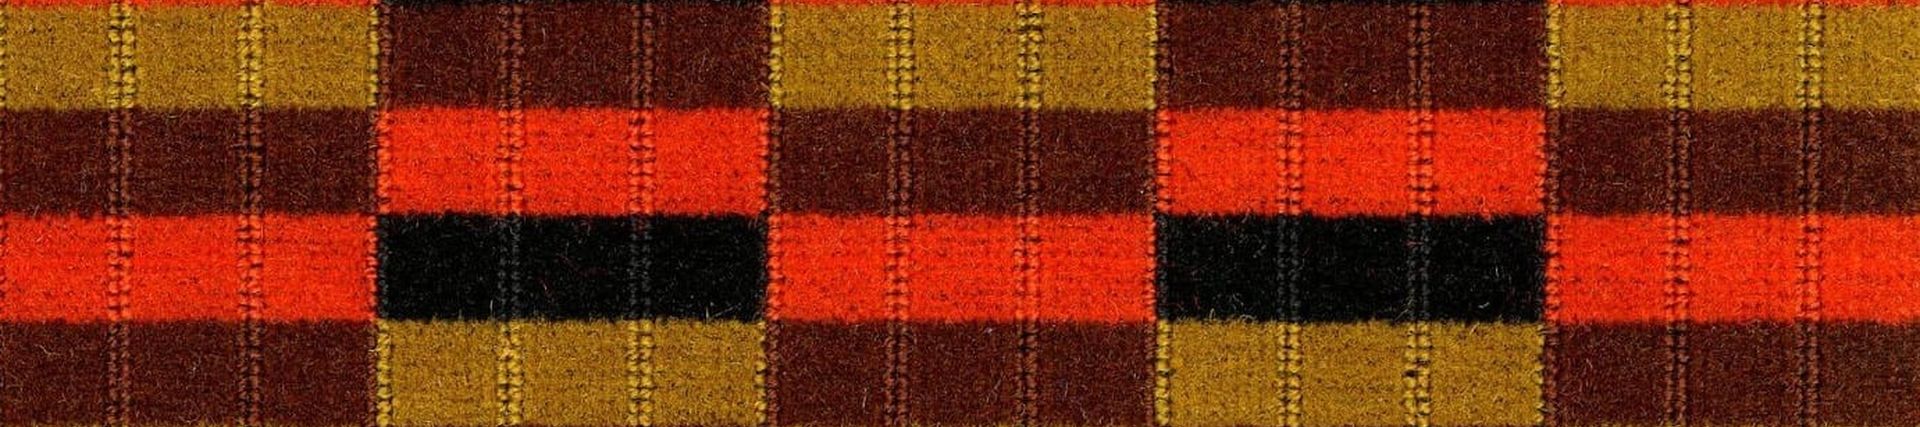 Brown, yellow and orange patterned moquette fabric